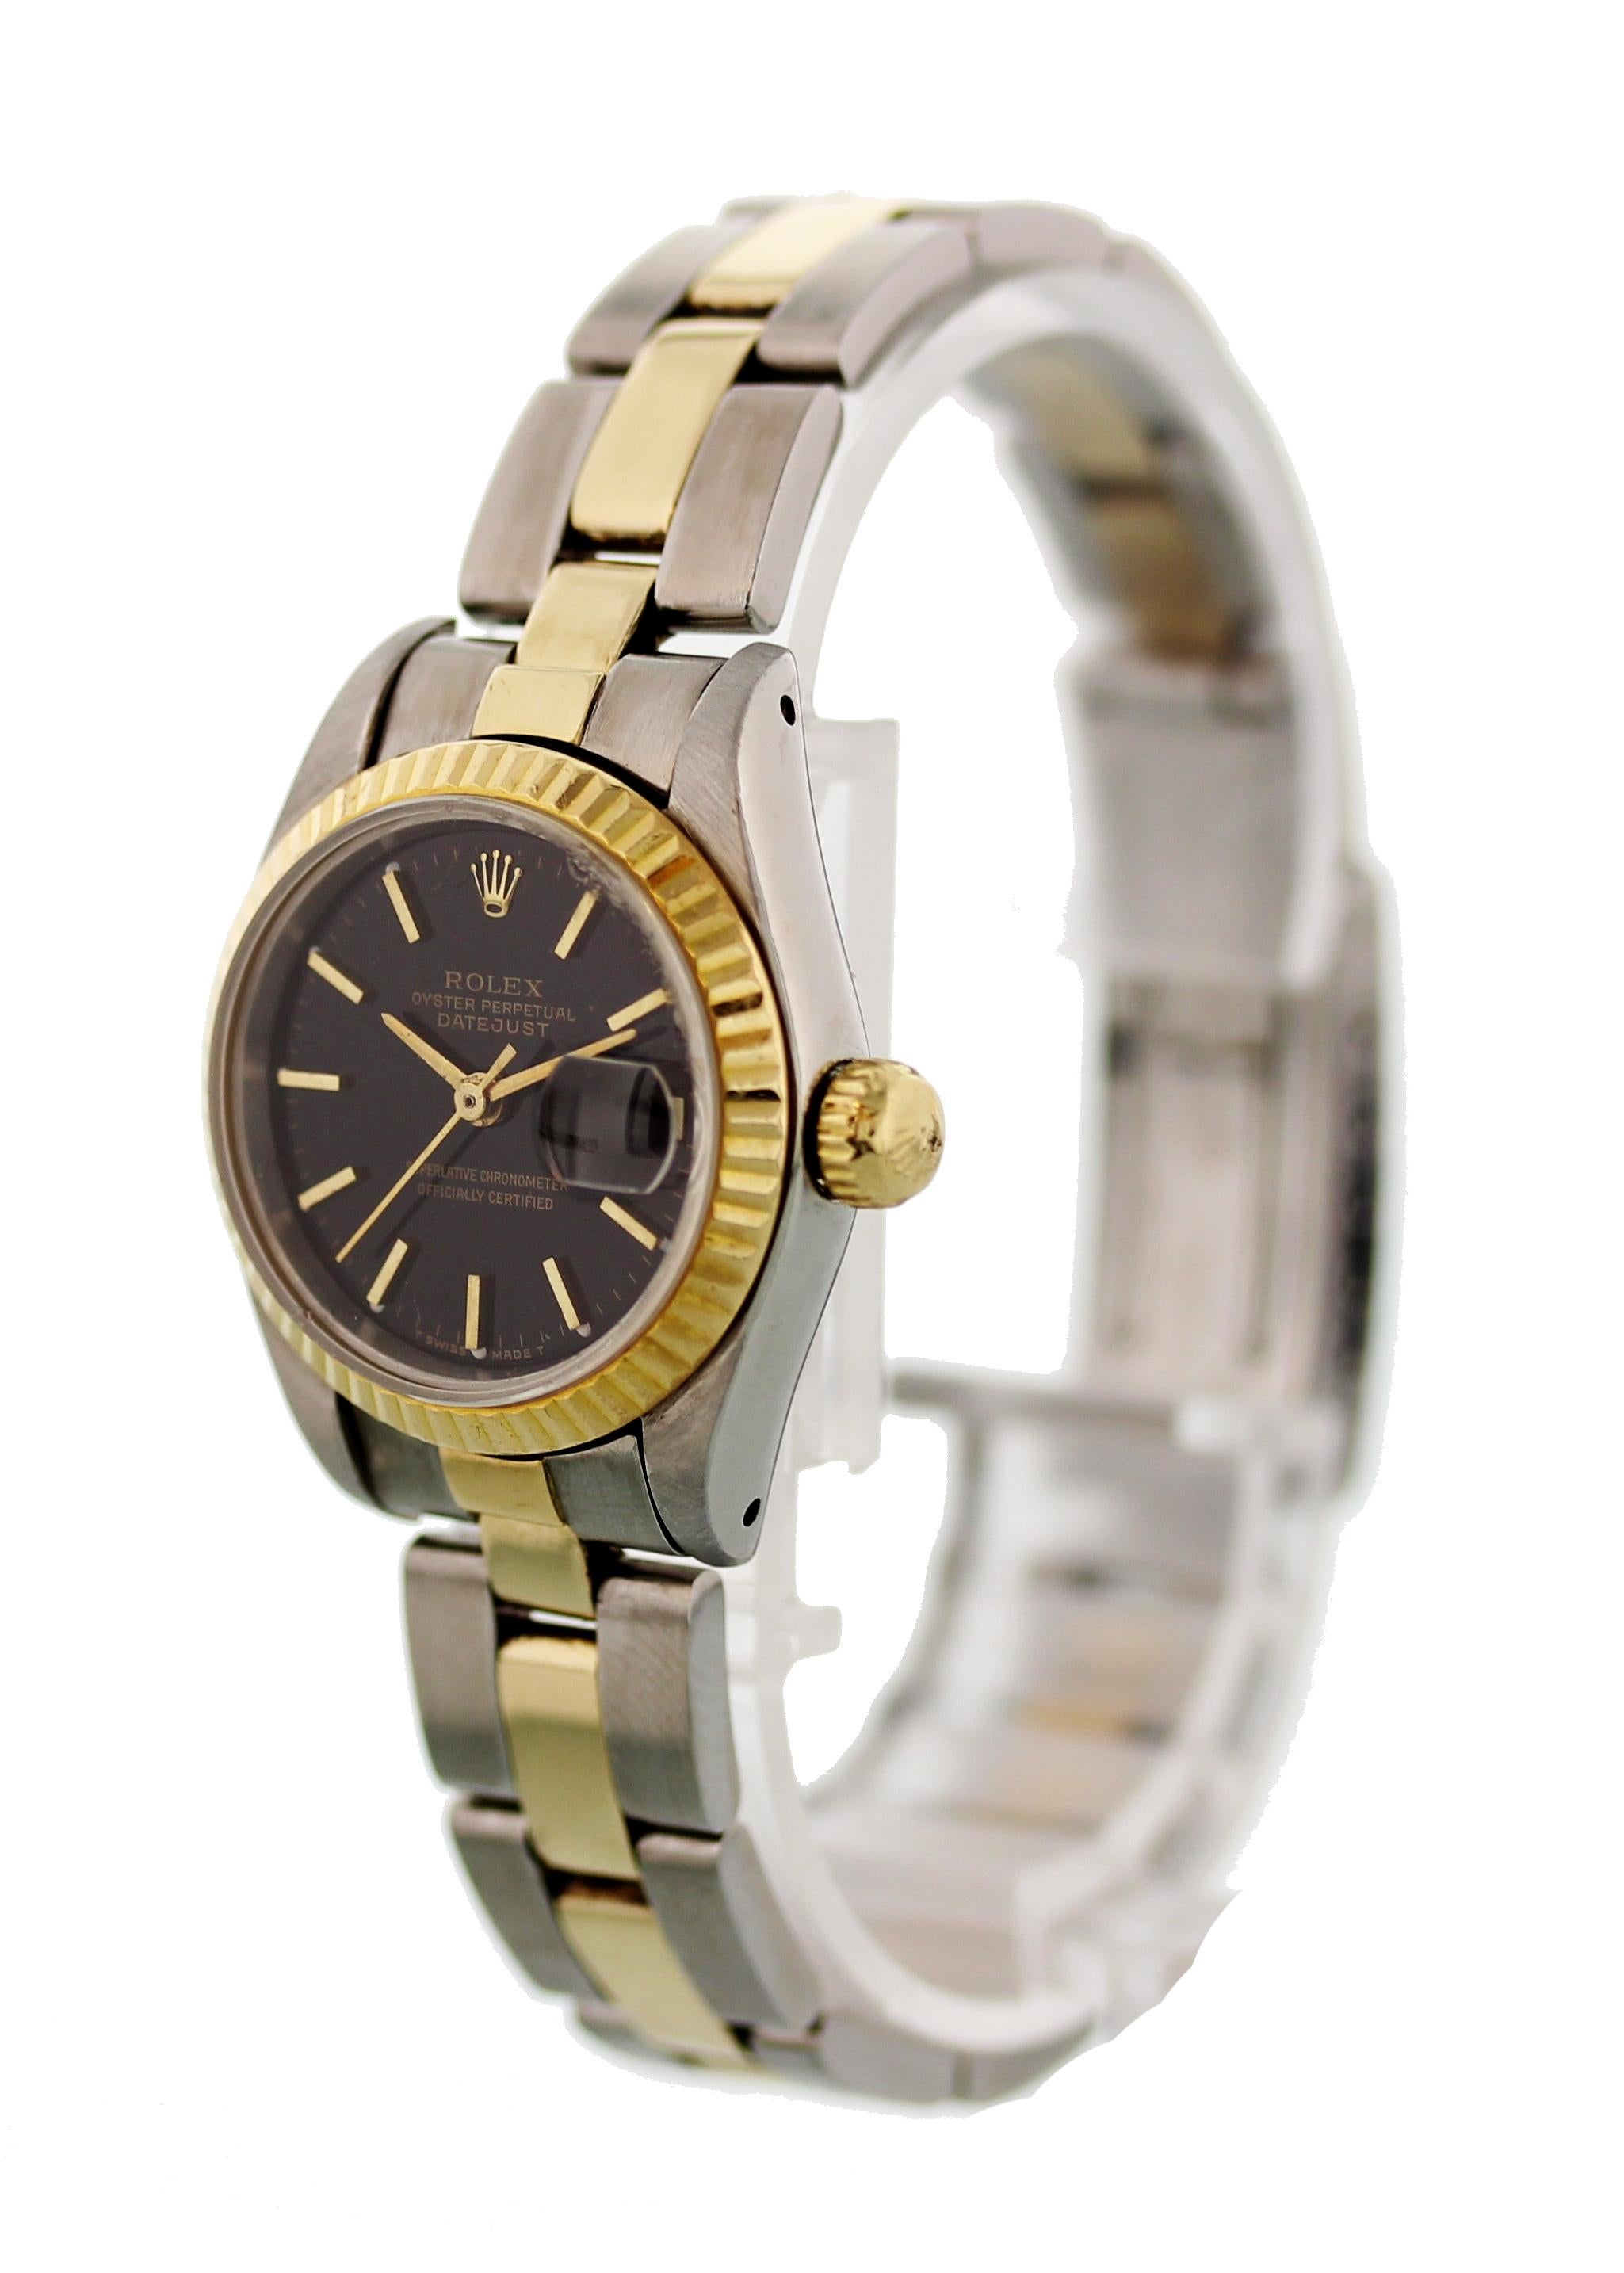 Rolex Datejust 69173 Ladies Watch In Excellent Condition For Sale In New York, NY